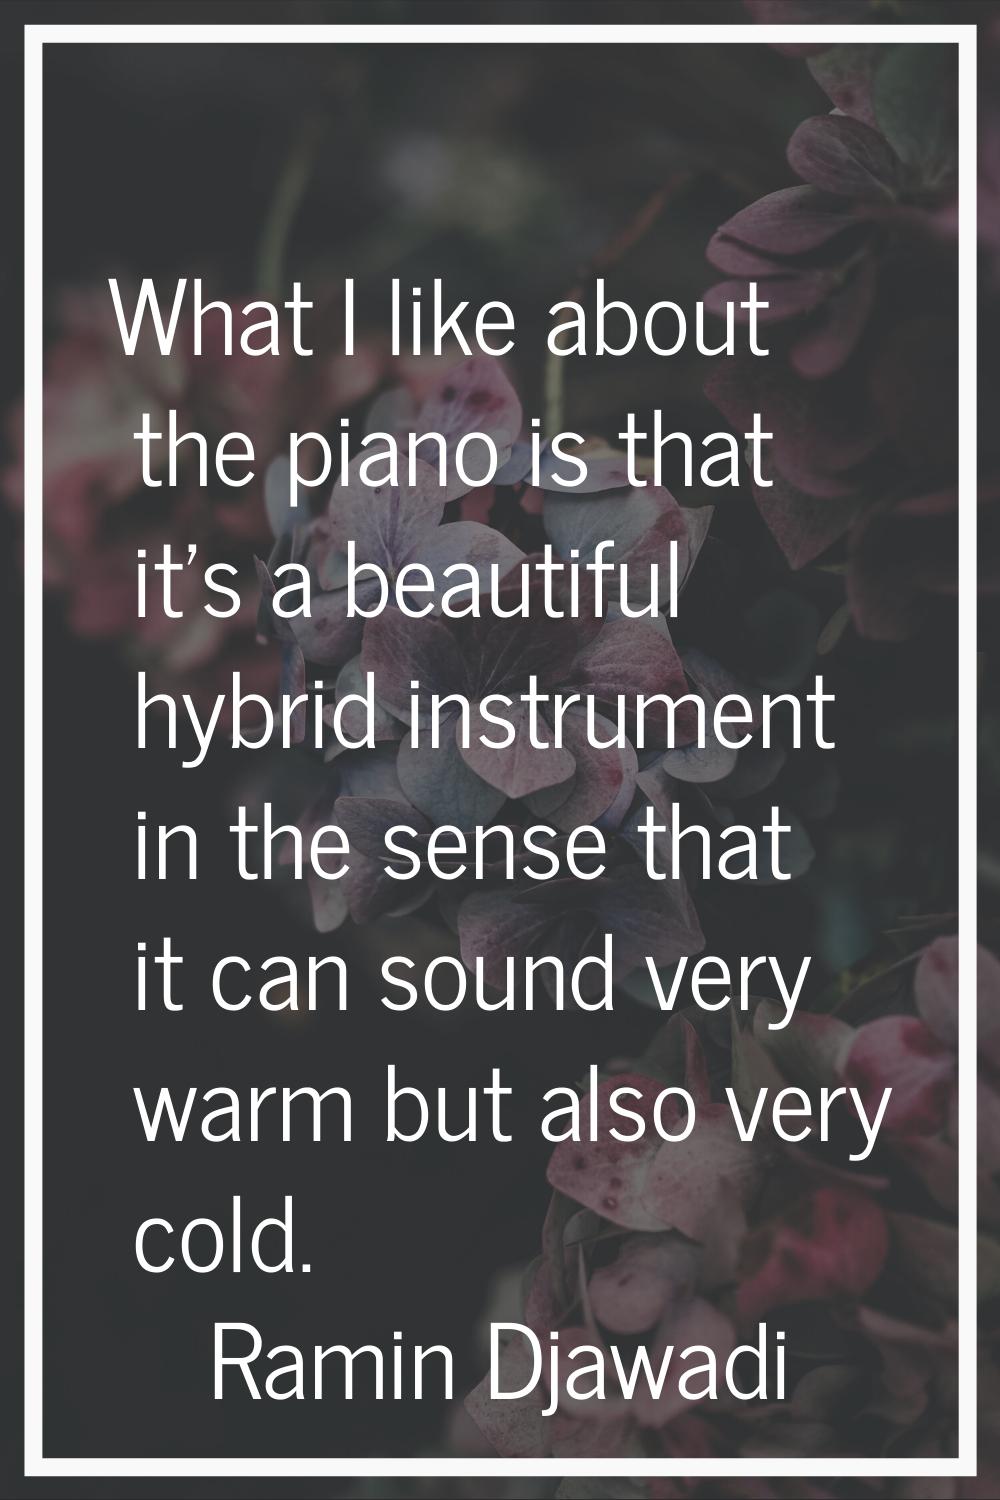 What I like about the piano is that it's a beautiful hybrid instrument in the sense that it can sou